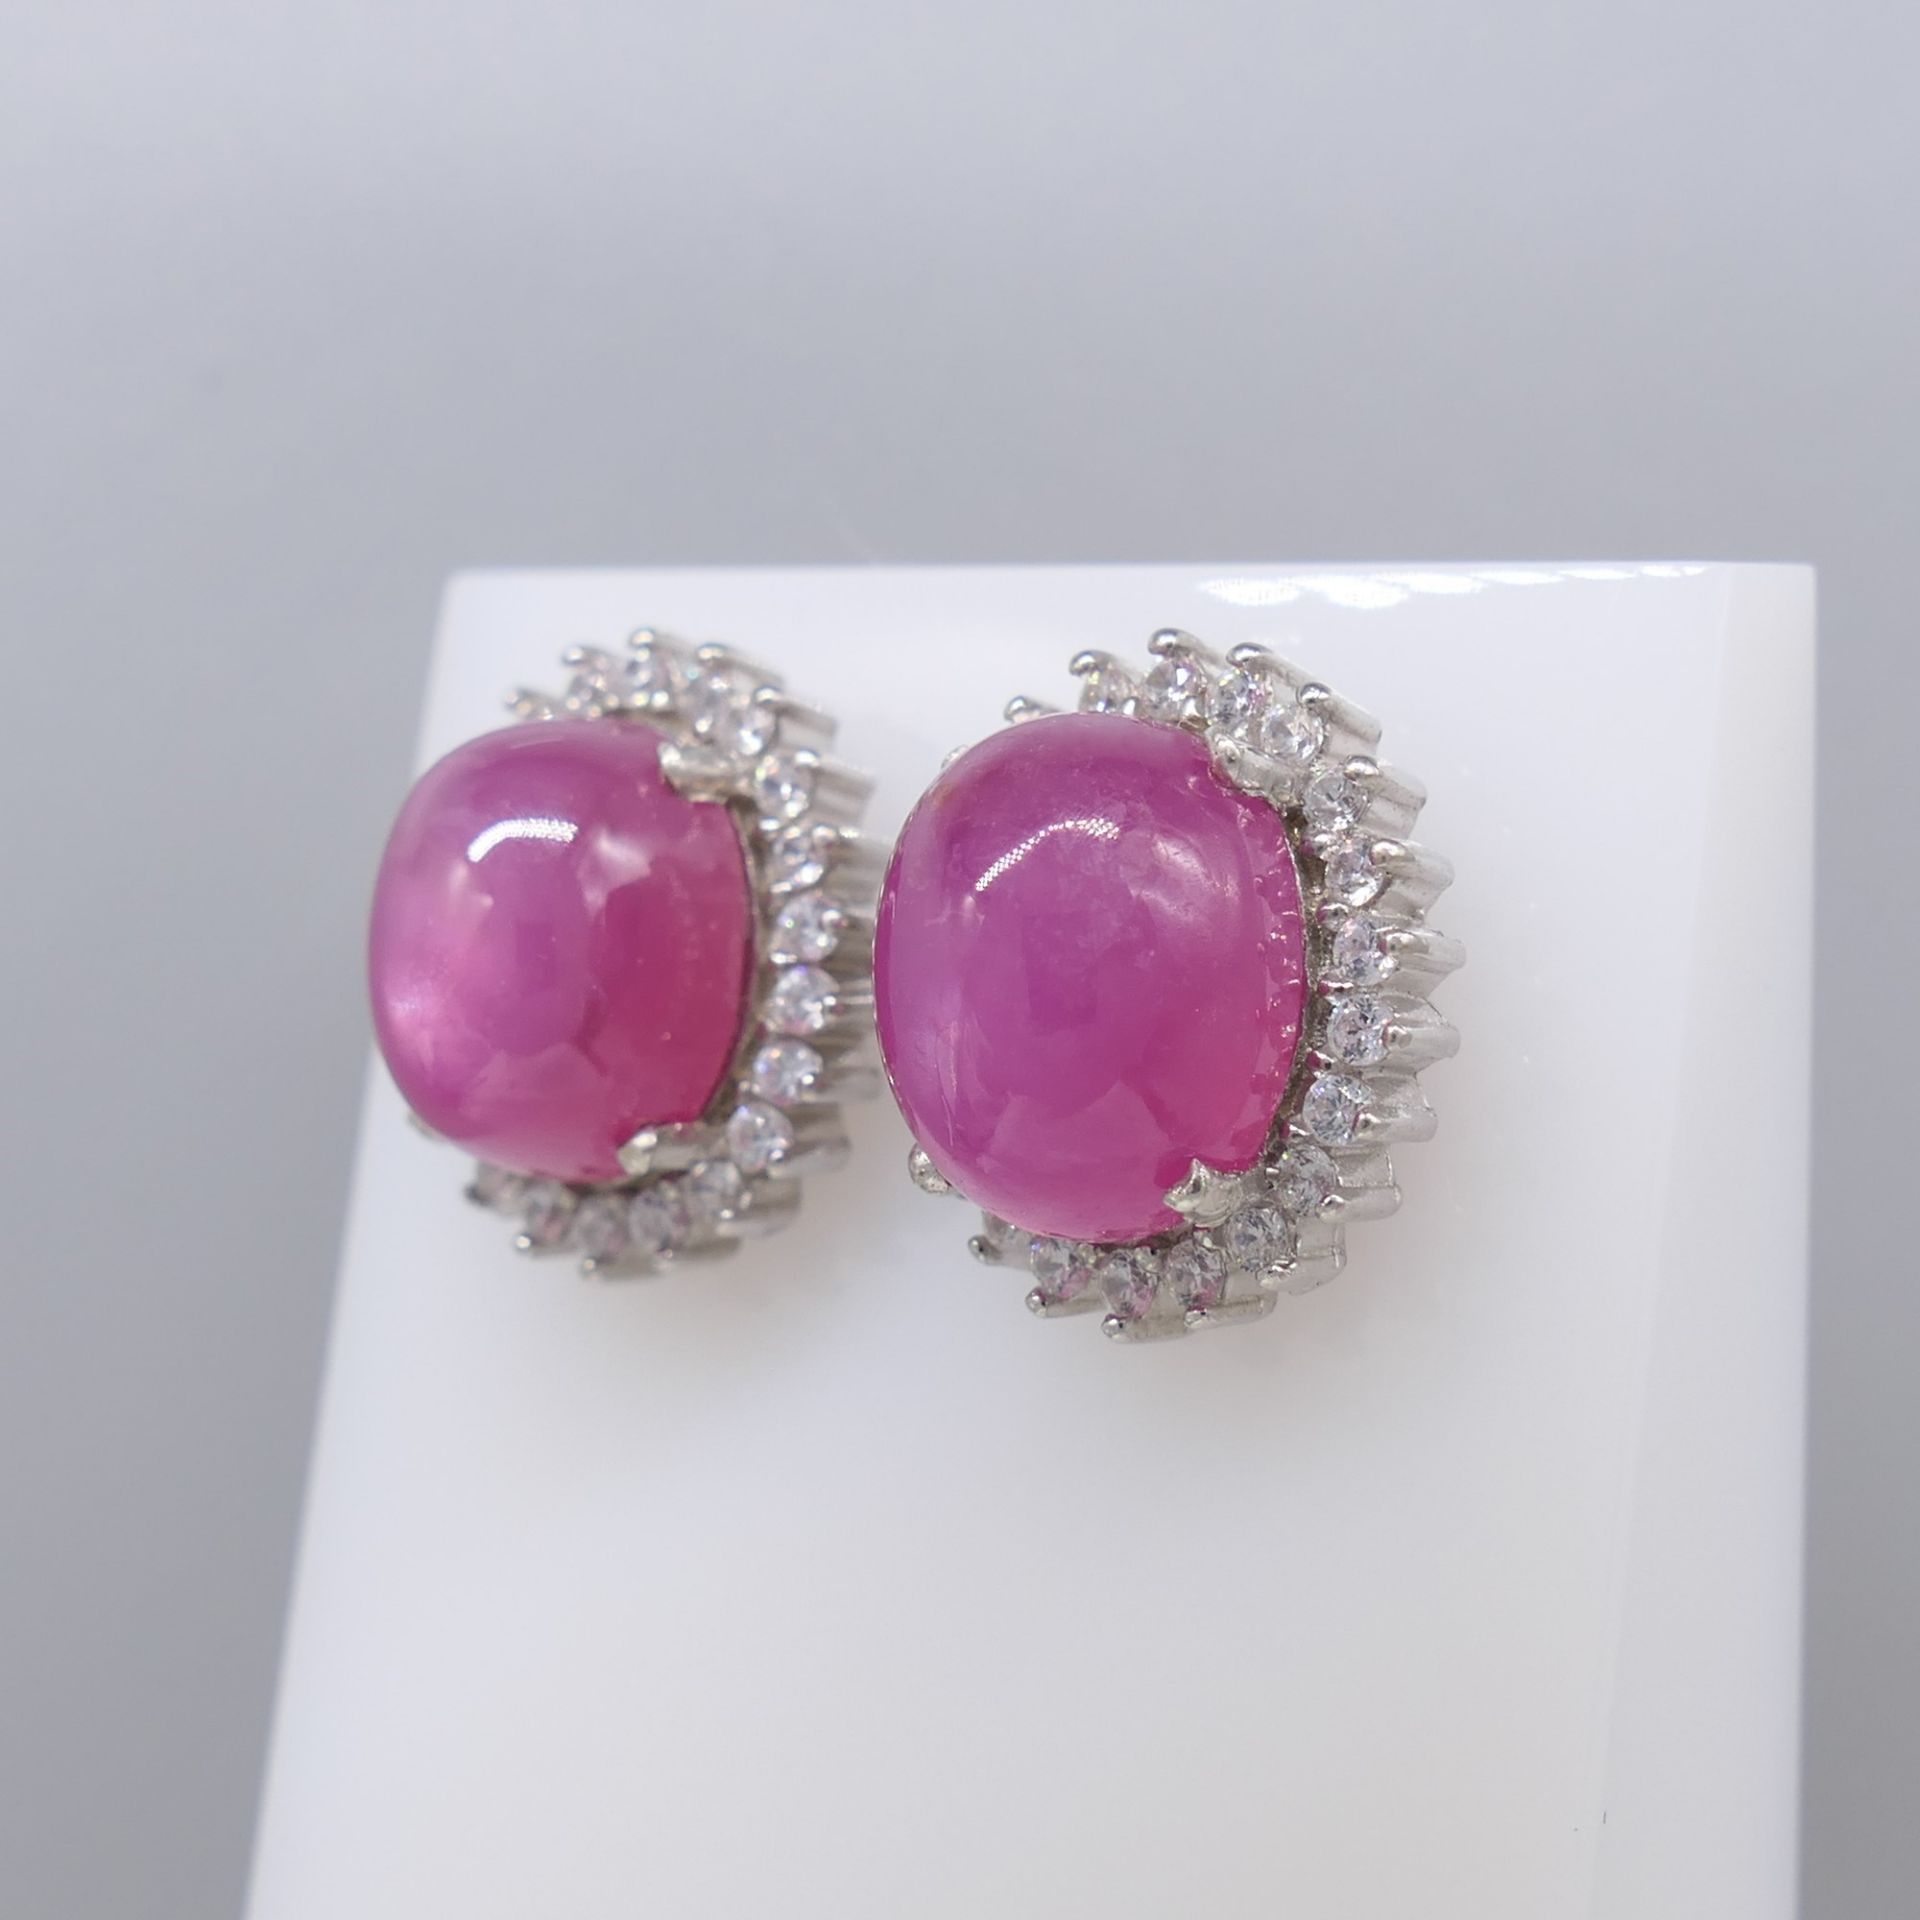 Cabochon Ruby Ear Studs In Sterling Silver, Boxed - Image 6 of 7